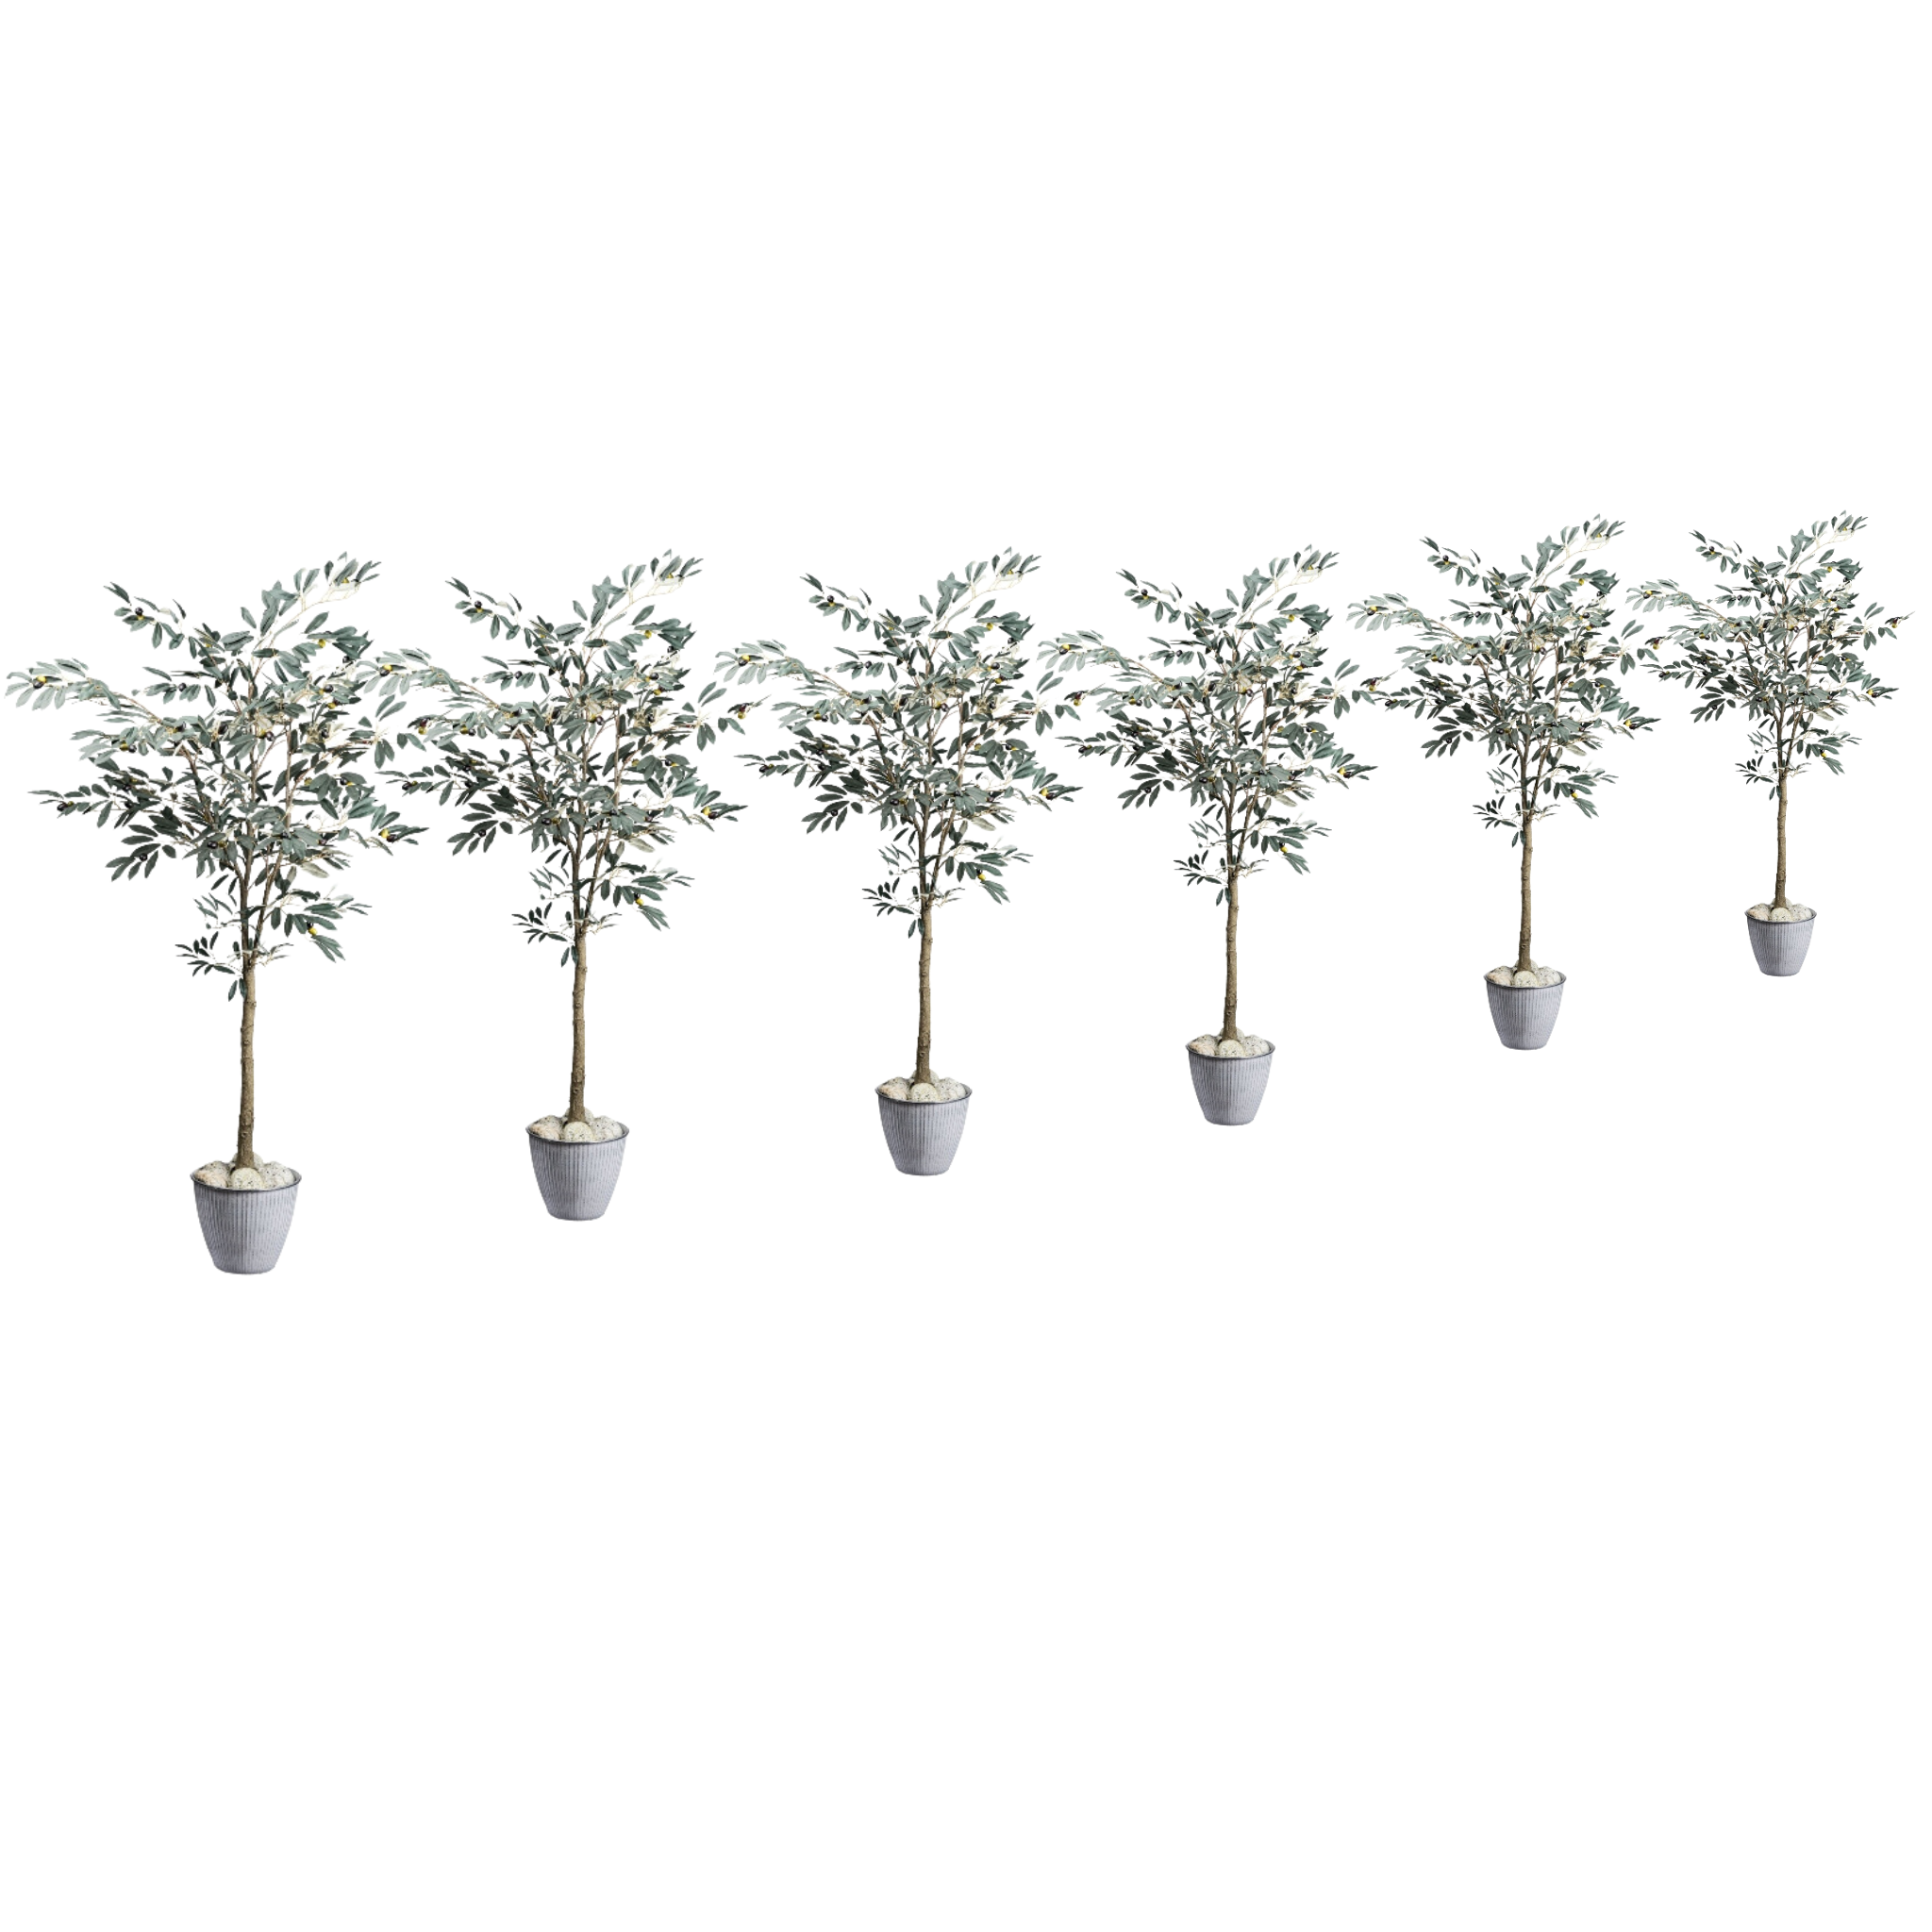 Olive tree artificial plant deco set of 6